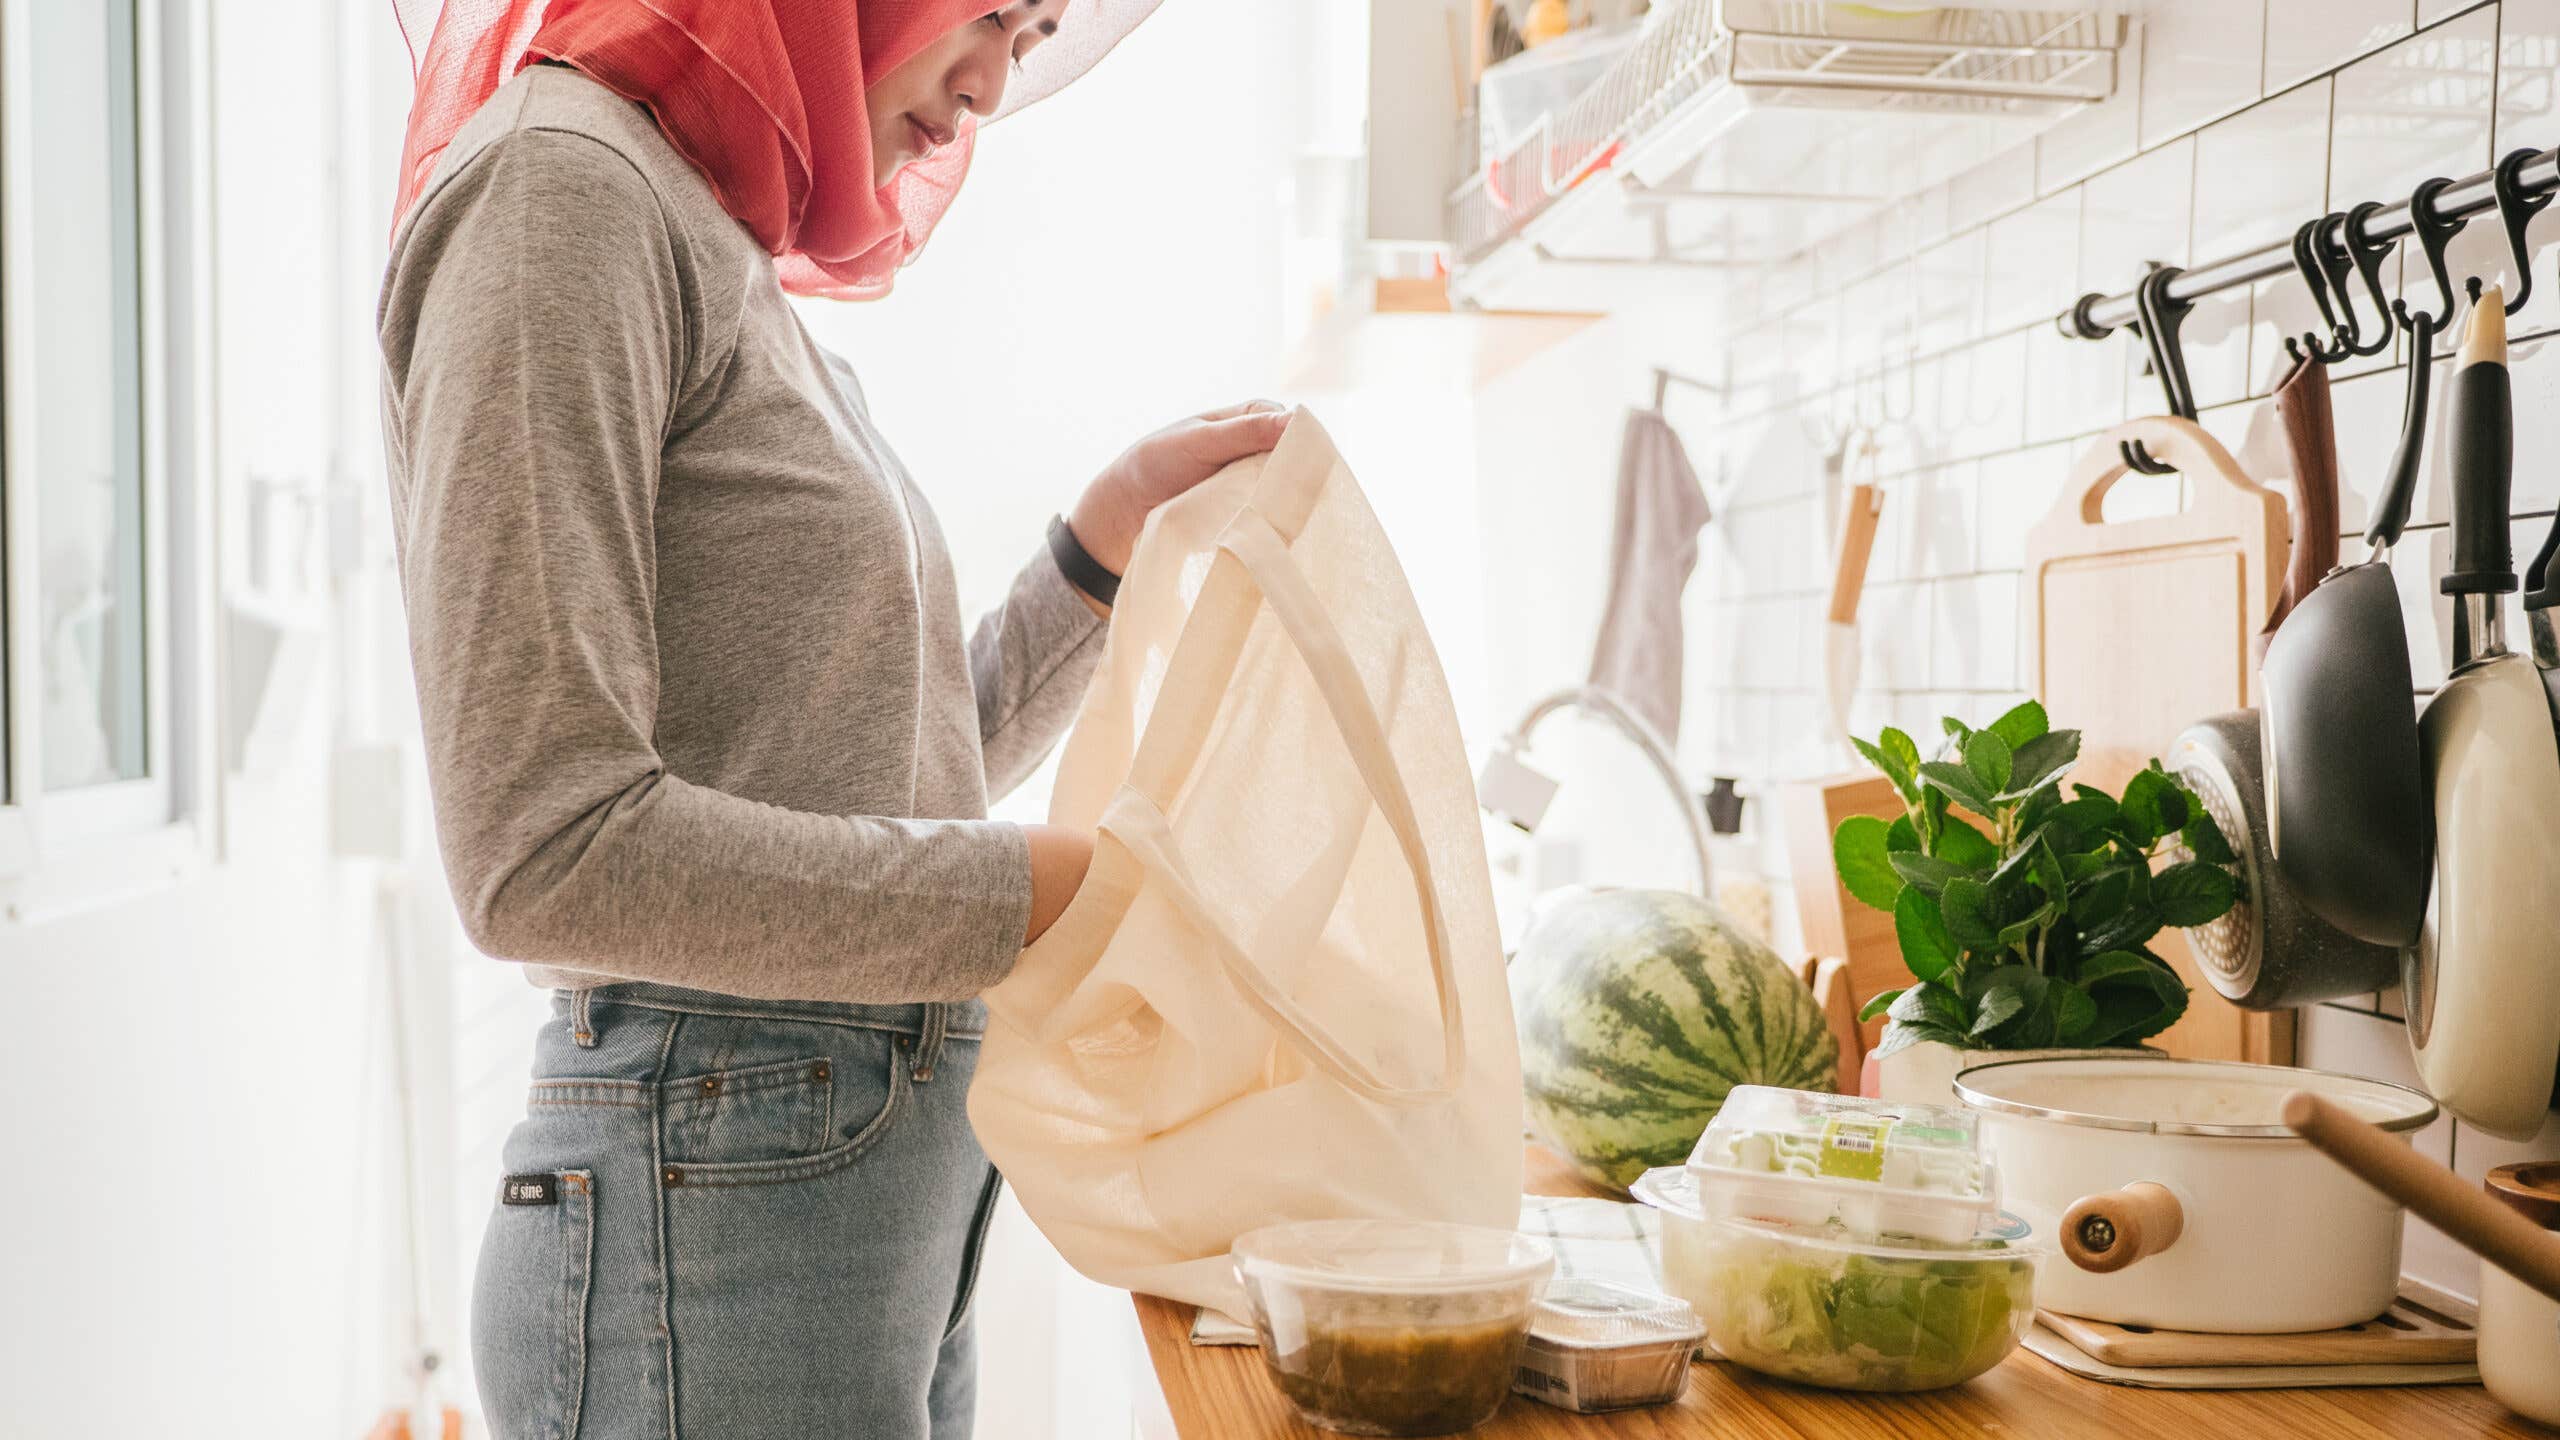 Islam woman unloading fresh vegetables from her reusable shopping bag at home.